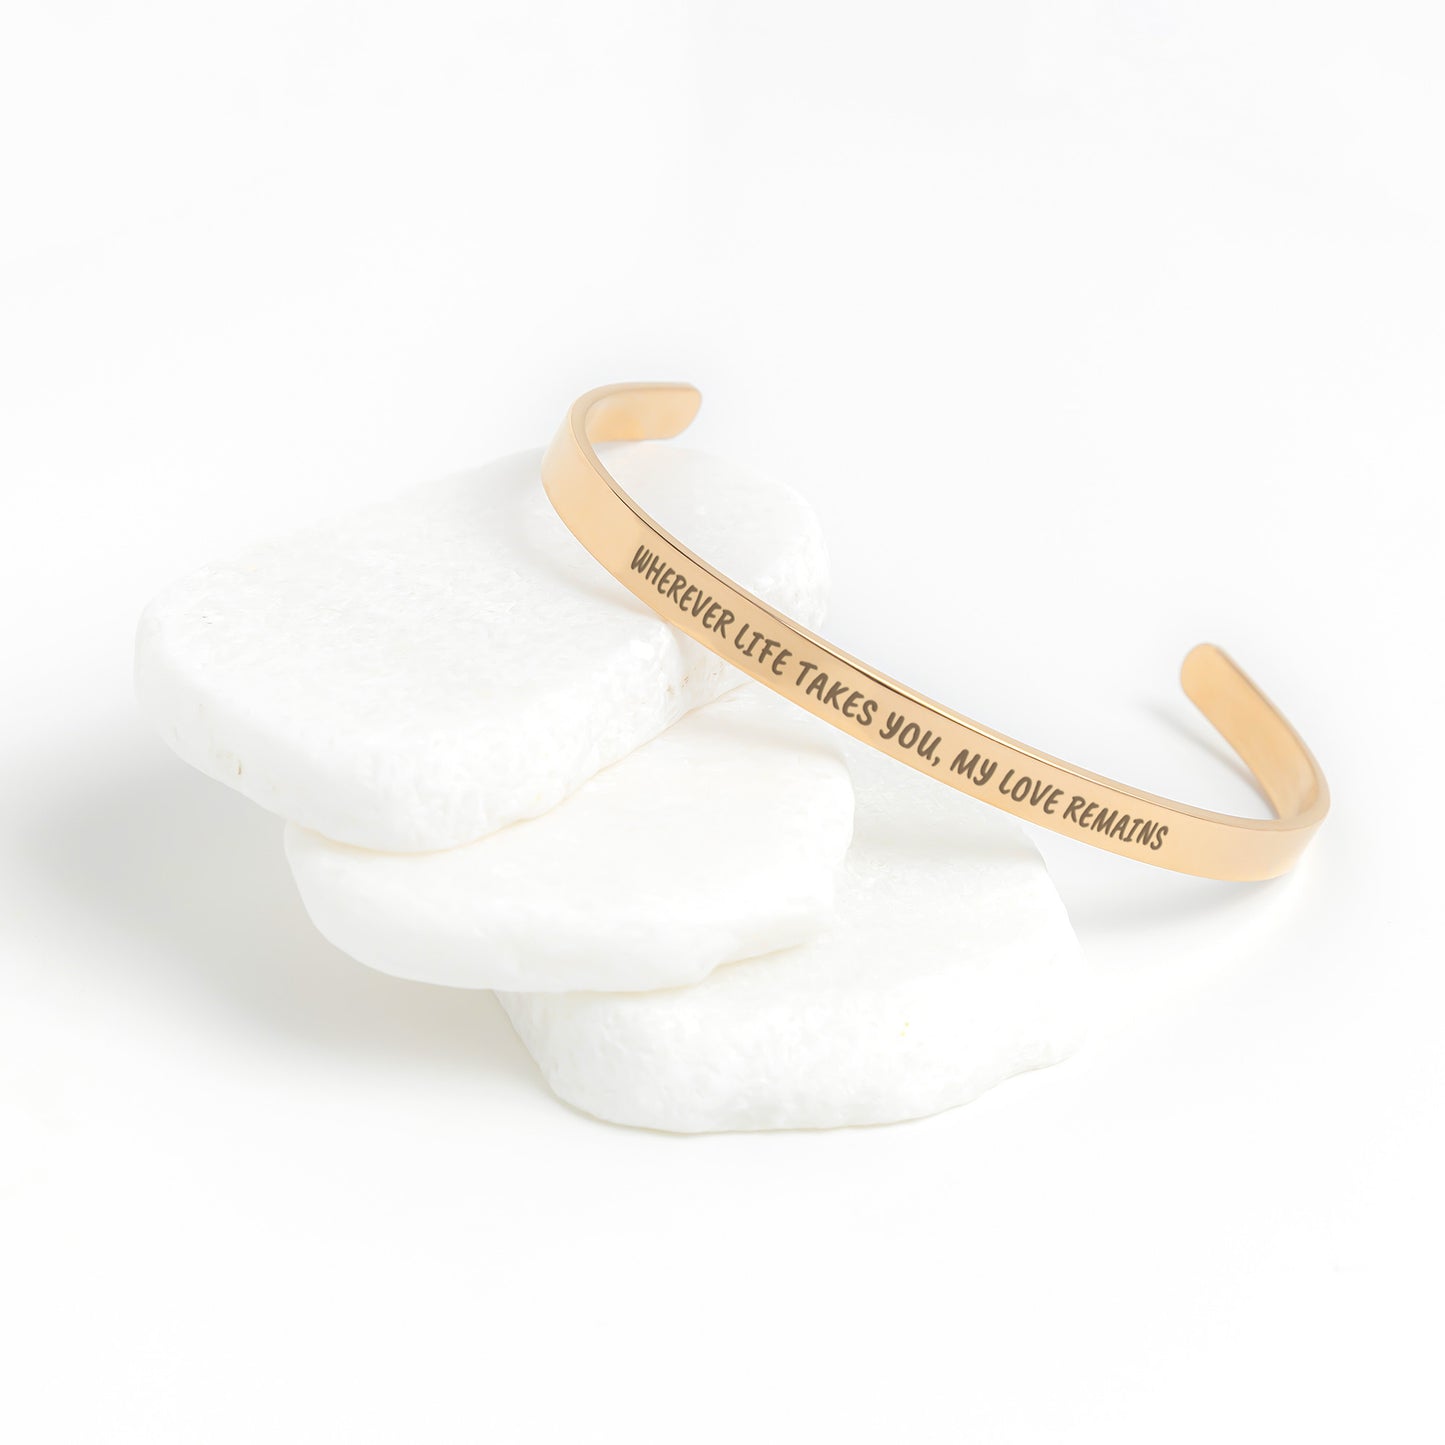 Wherever Life Takes You, My Love Remains Cuff Bracelet